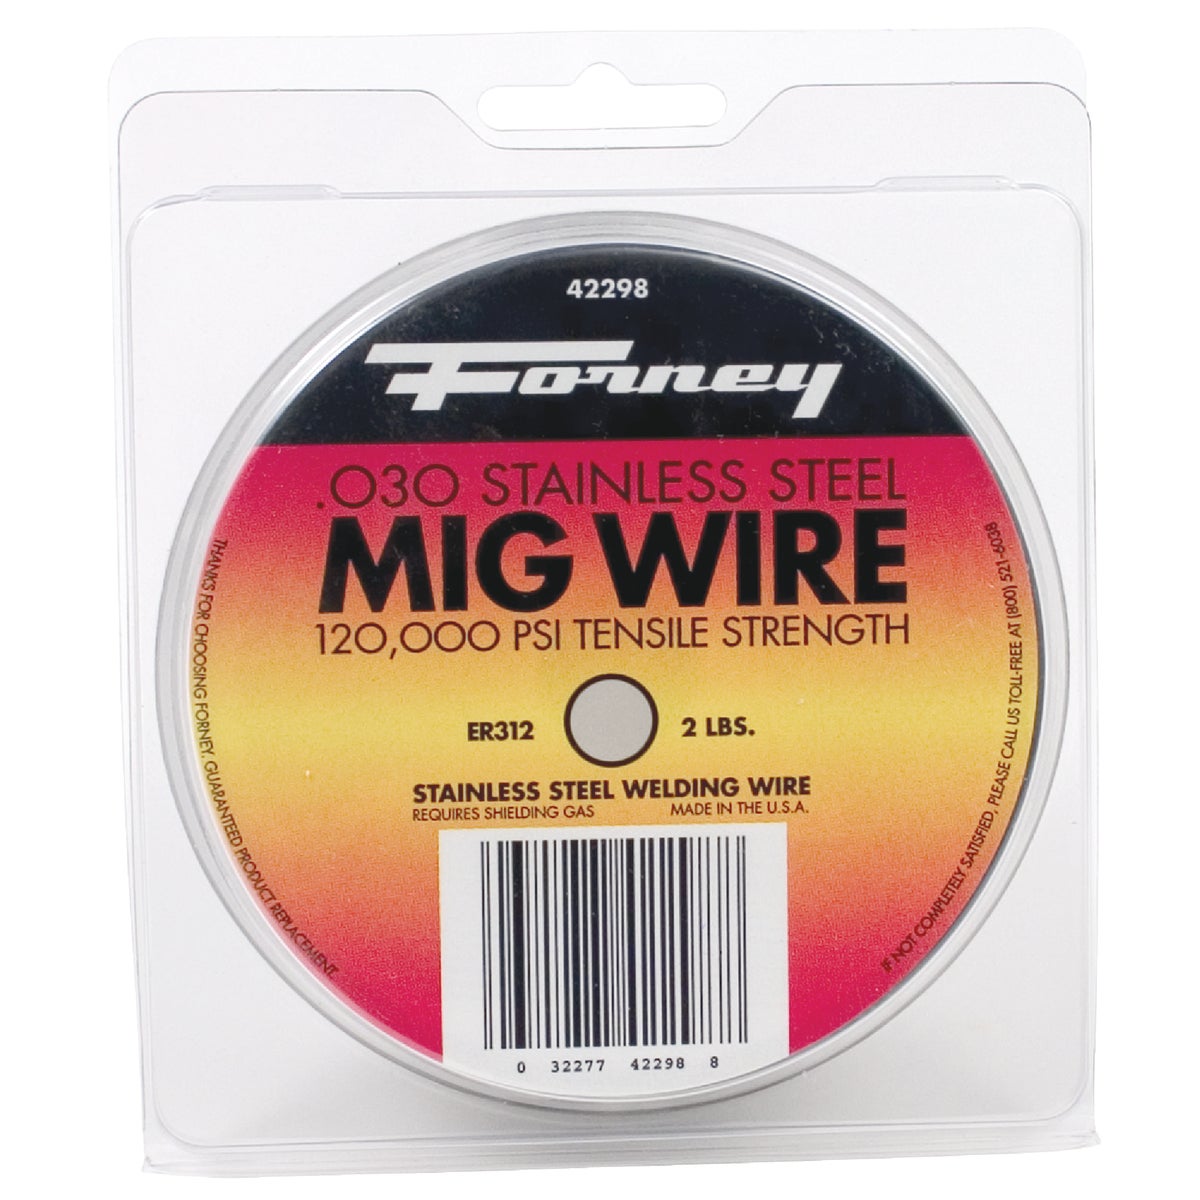 Item 337255, ER308 stainless steel MIG (GMAW) welding wire consists of 20% chromium and 